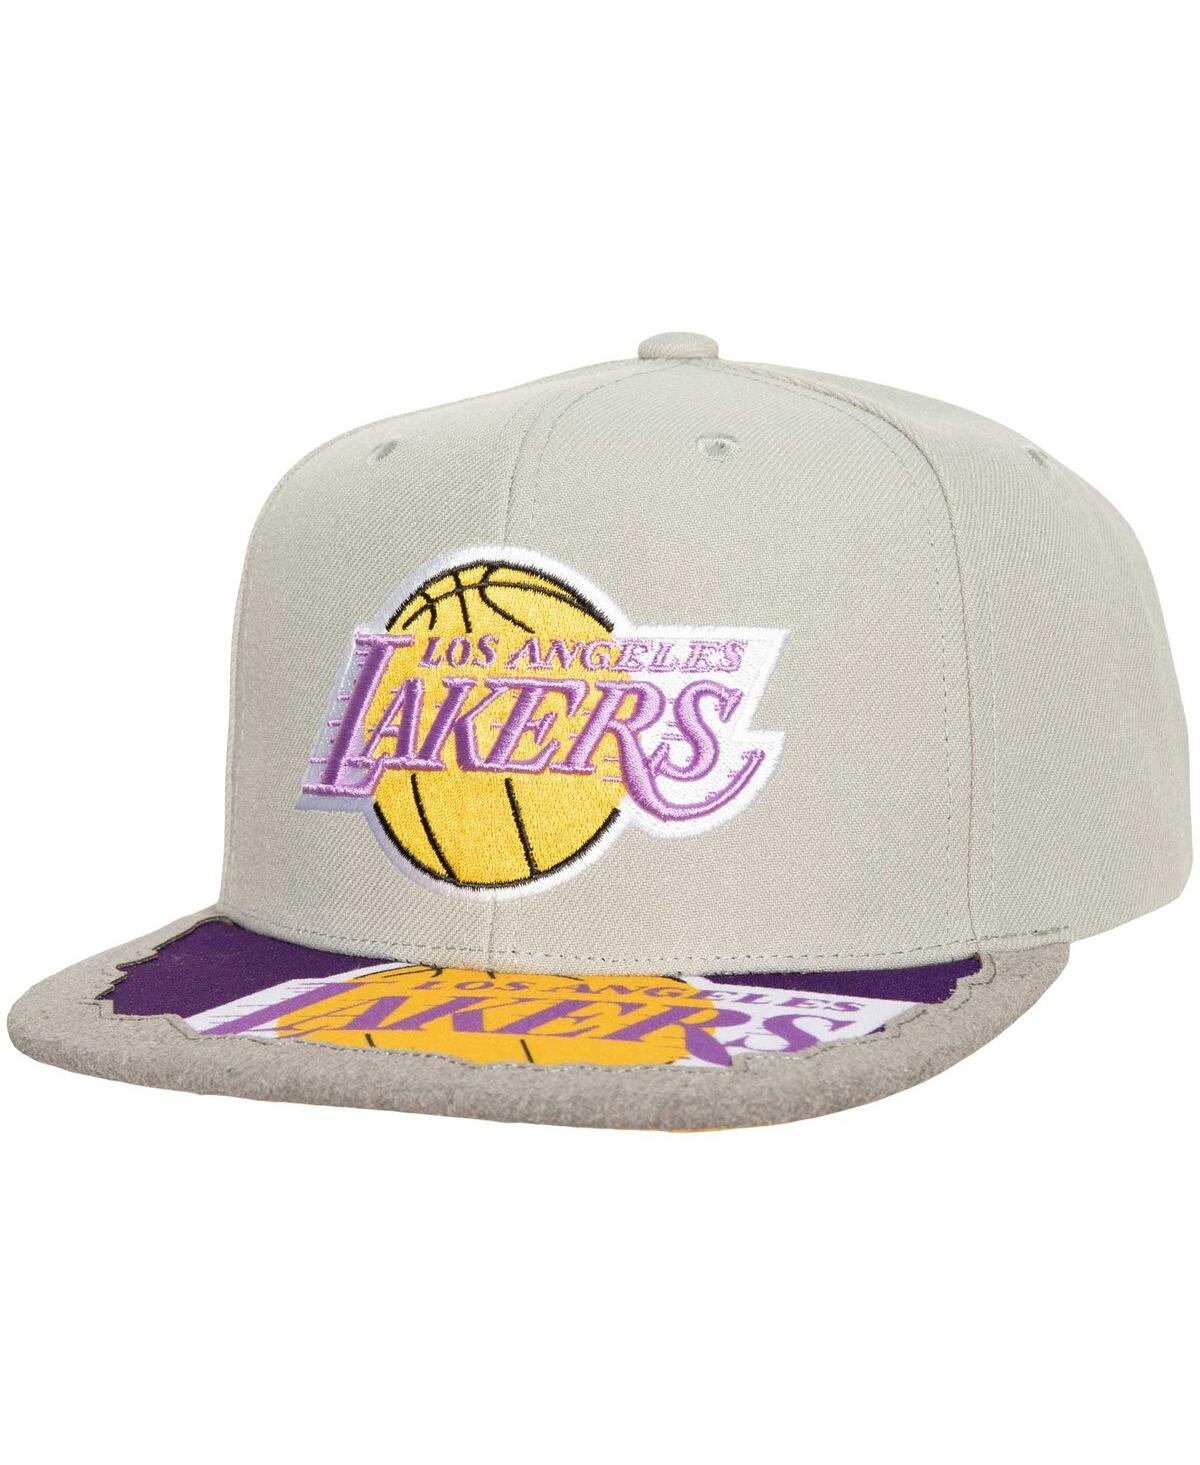 Mitchell & Ness Men's  Gray Los Angeles Lakers Munch Time Snapback Hat